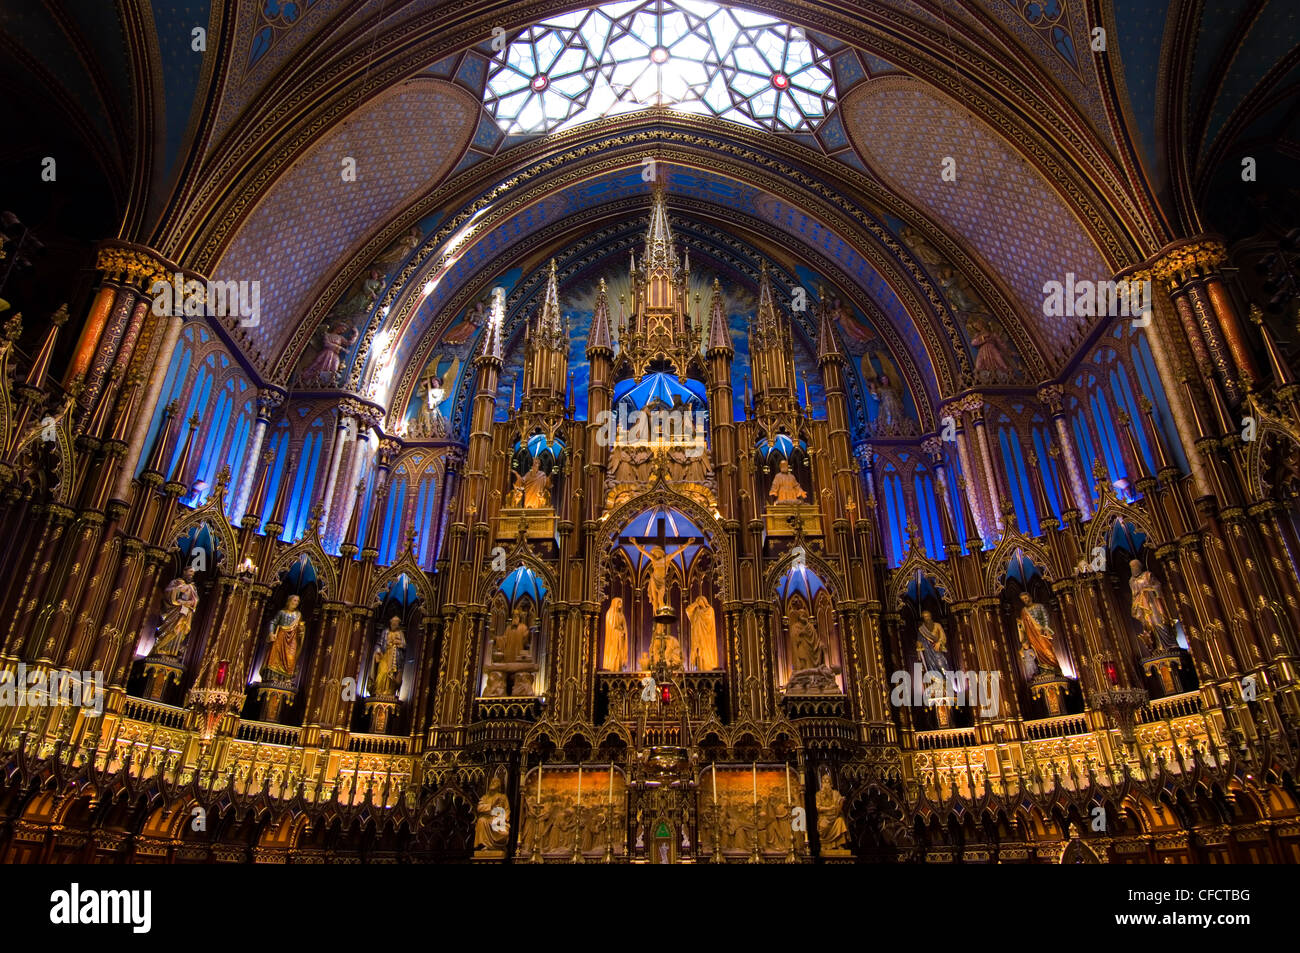 Interior alter of Notre-Basilica, at Place d'Armes in Old Montreal, Quebec, Canada. Stock Photo